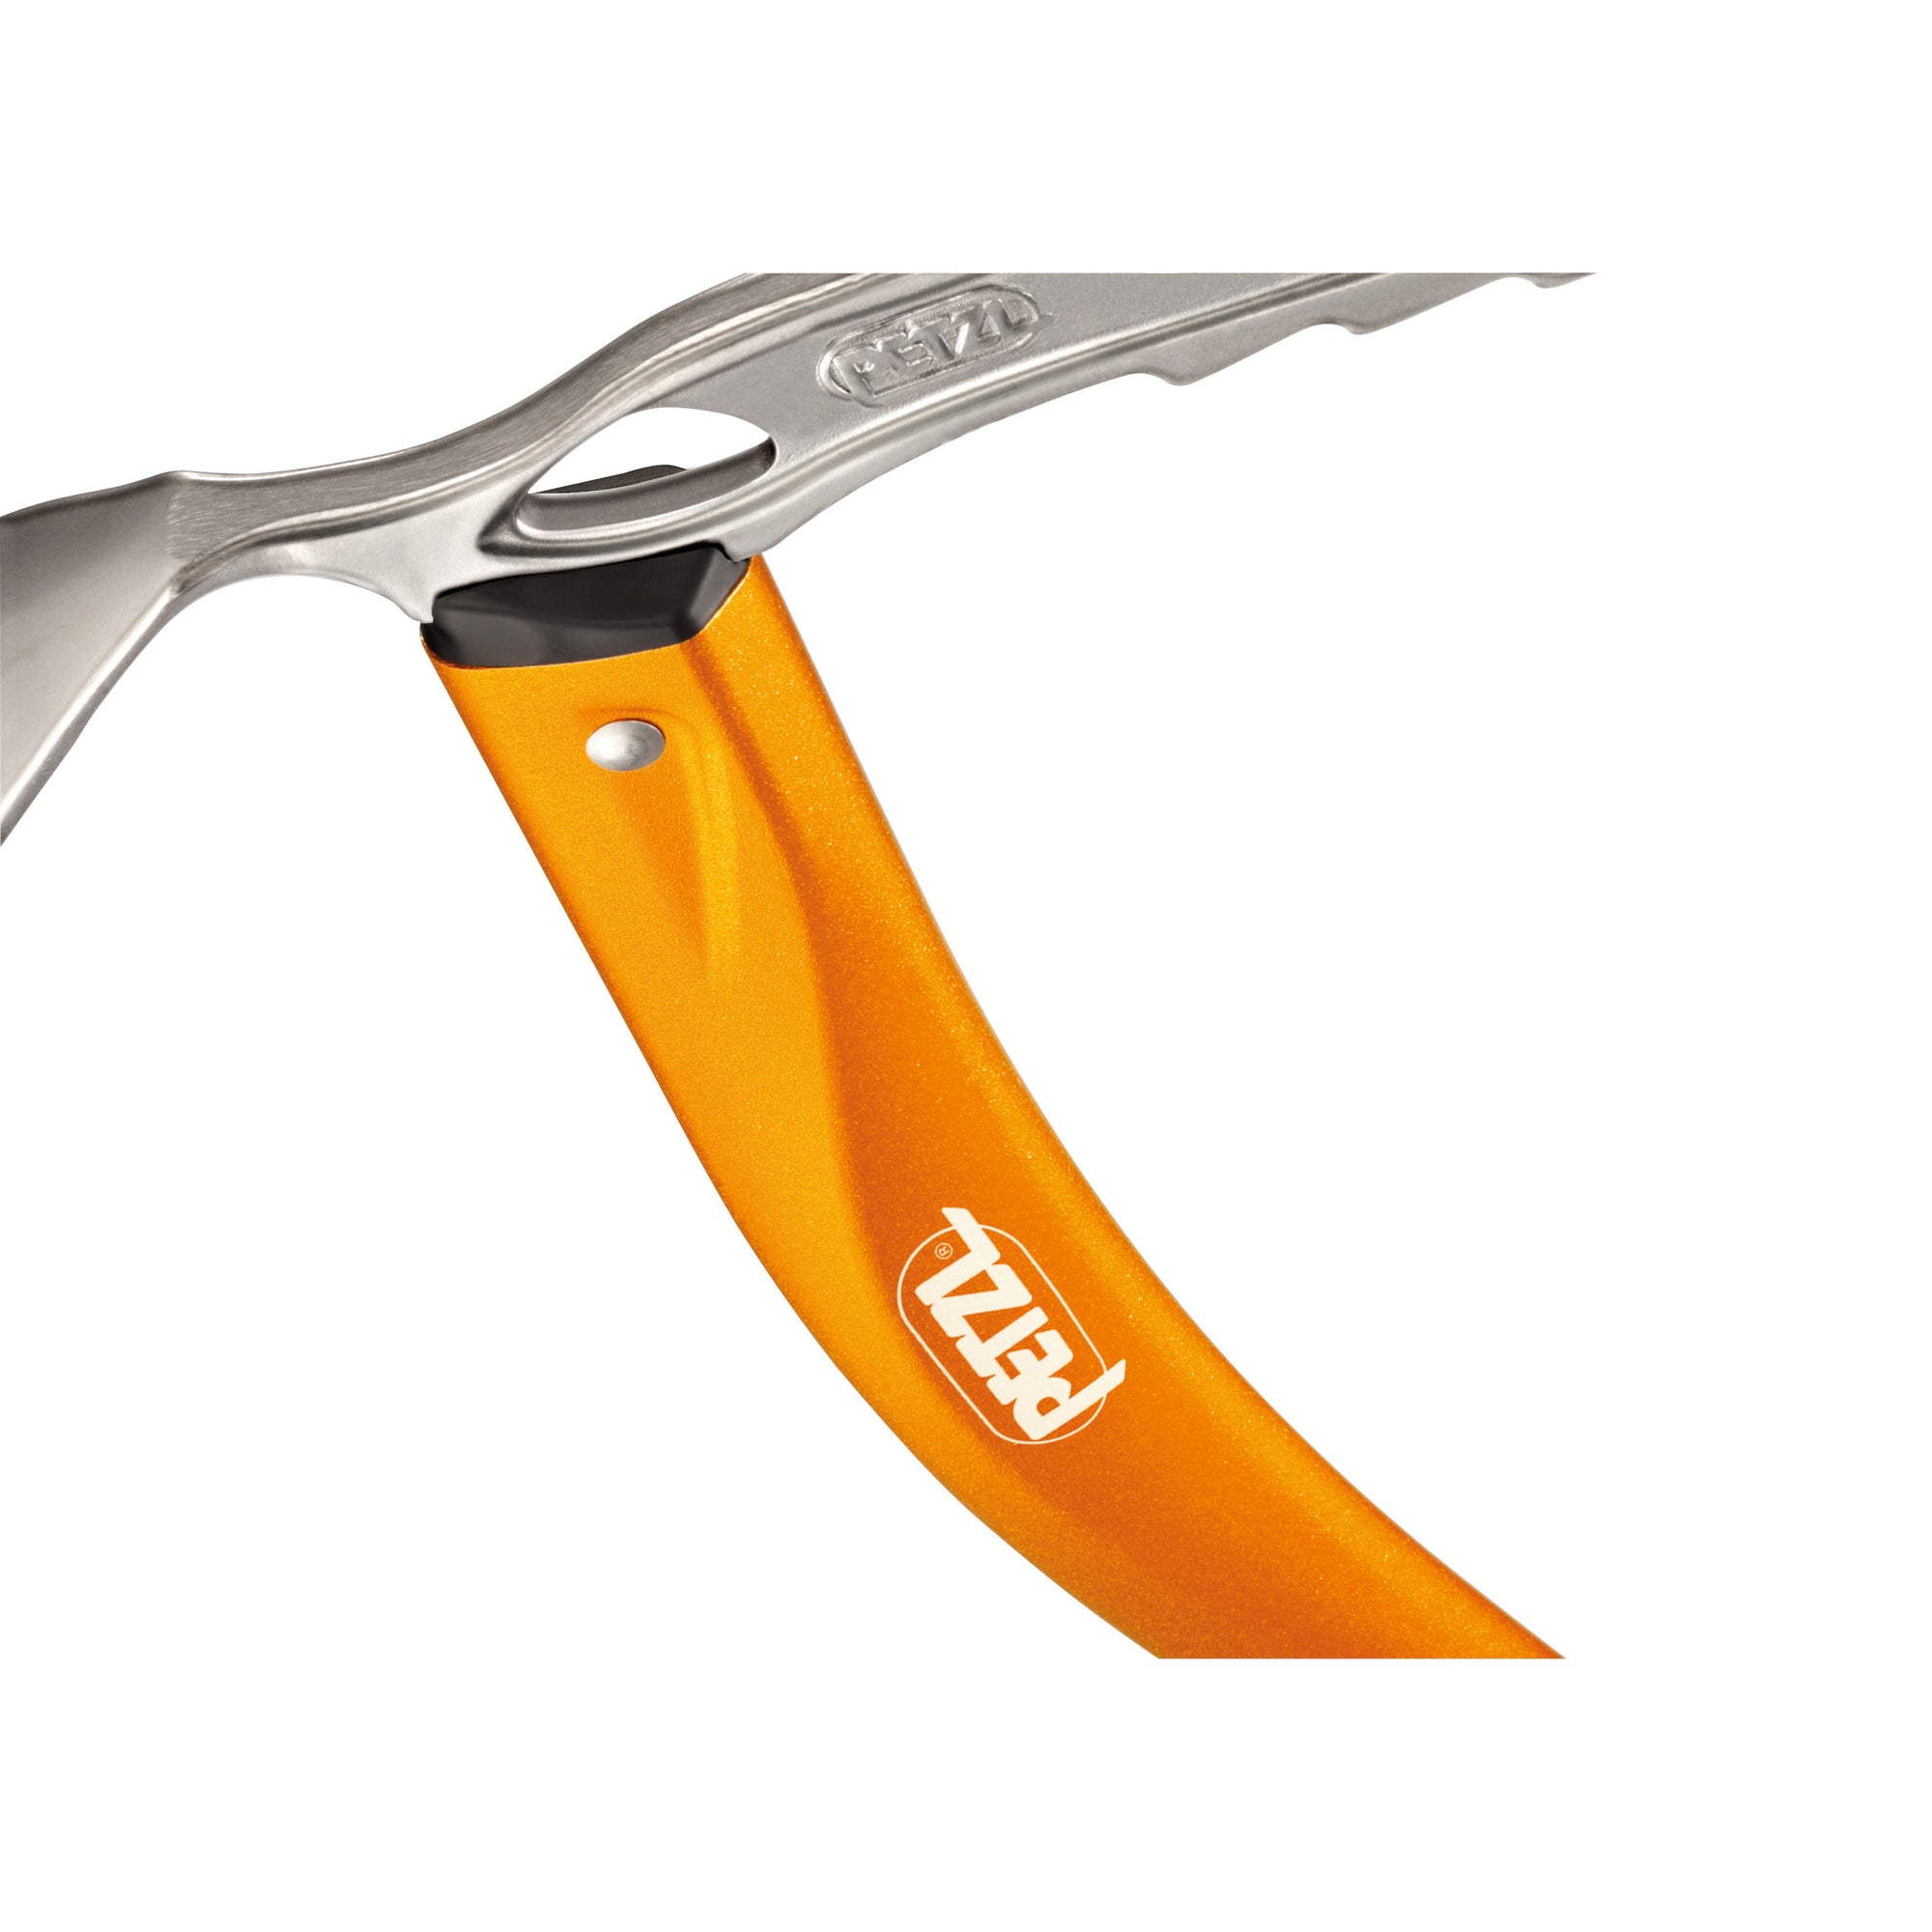 Petzl Summit Evo Ice Axe, shown stood upright with black handle, orange shaft and silver pick